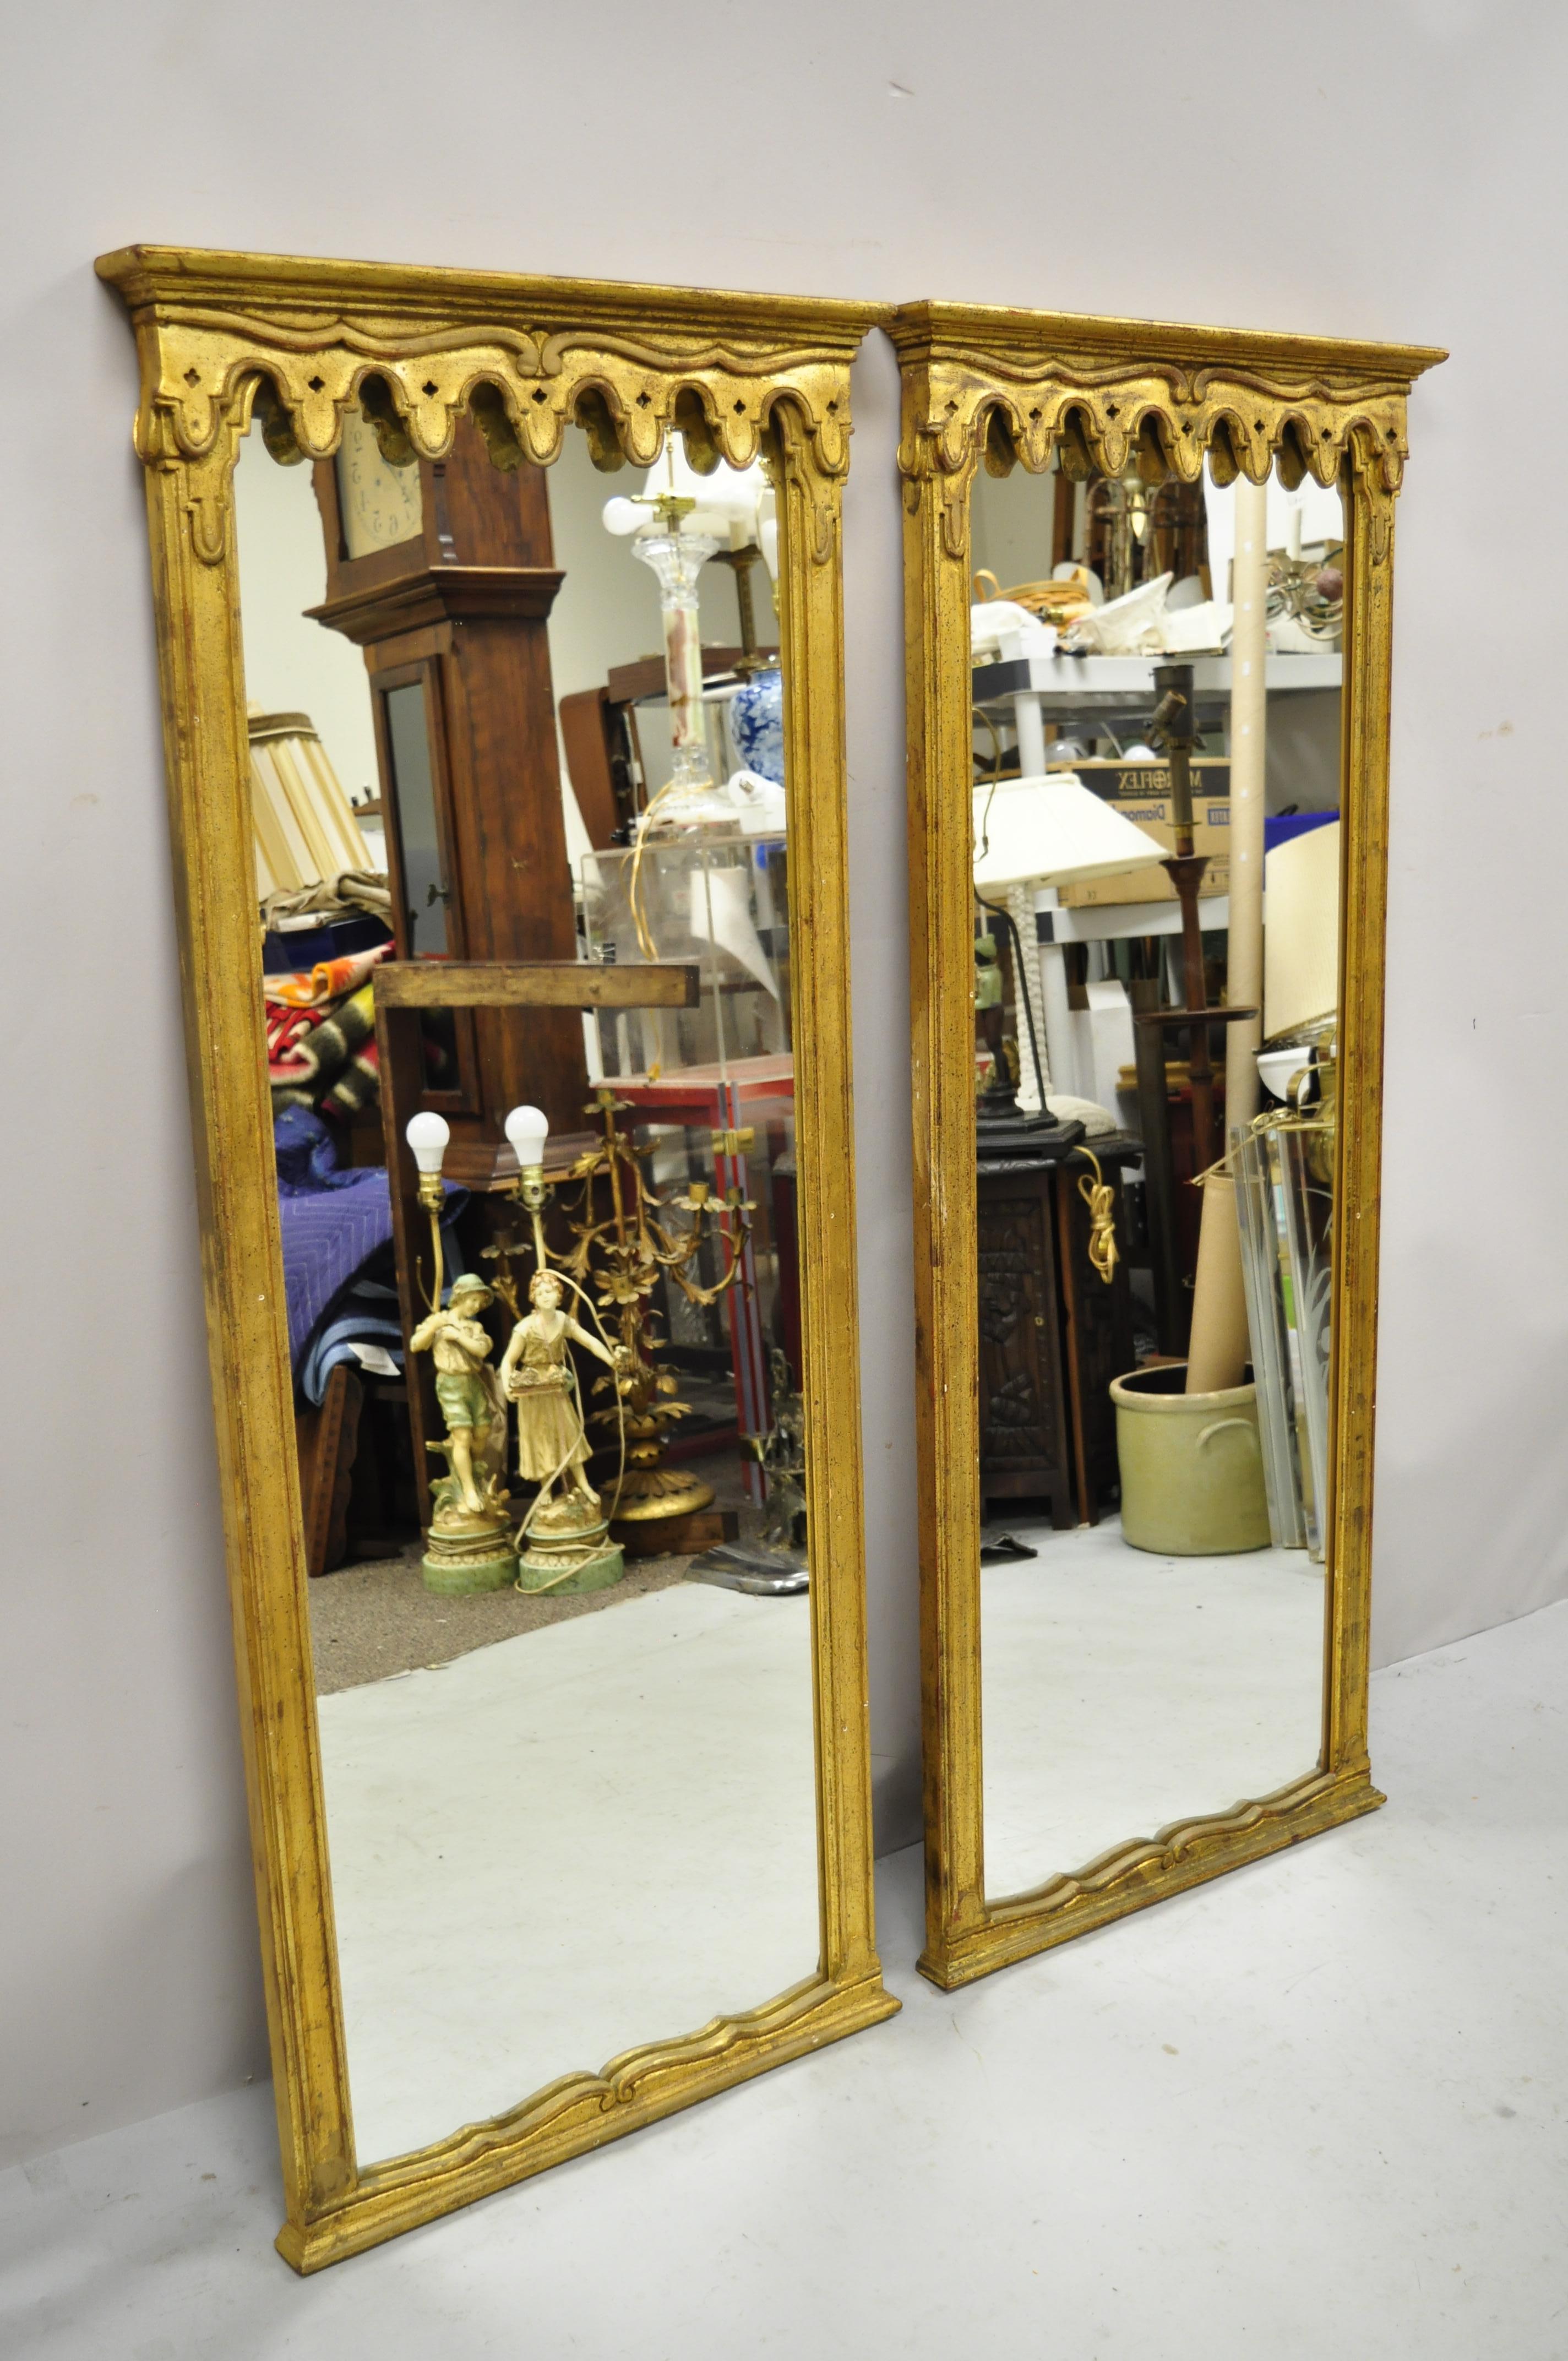 Vintage Italian Hollywood Regency Gold Giltwood Trumeau Wall Mirrors, a Pair For Sale 5